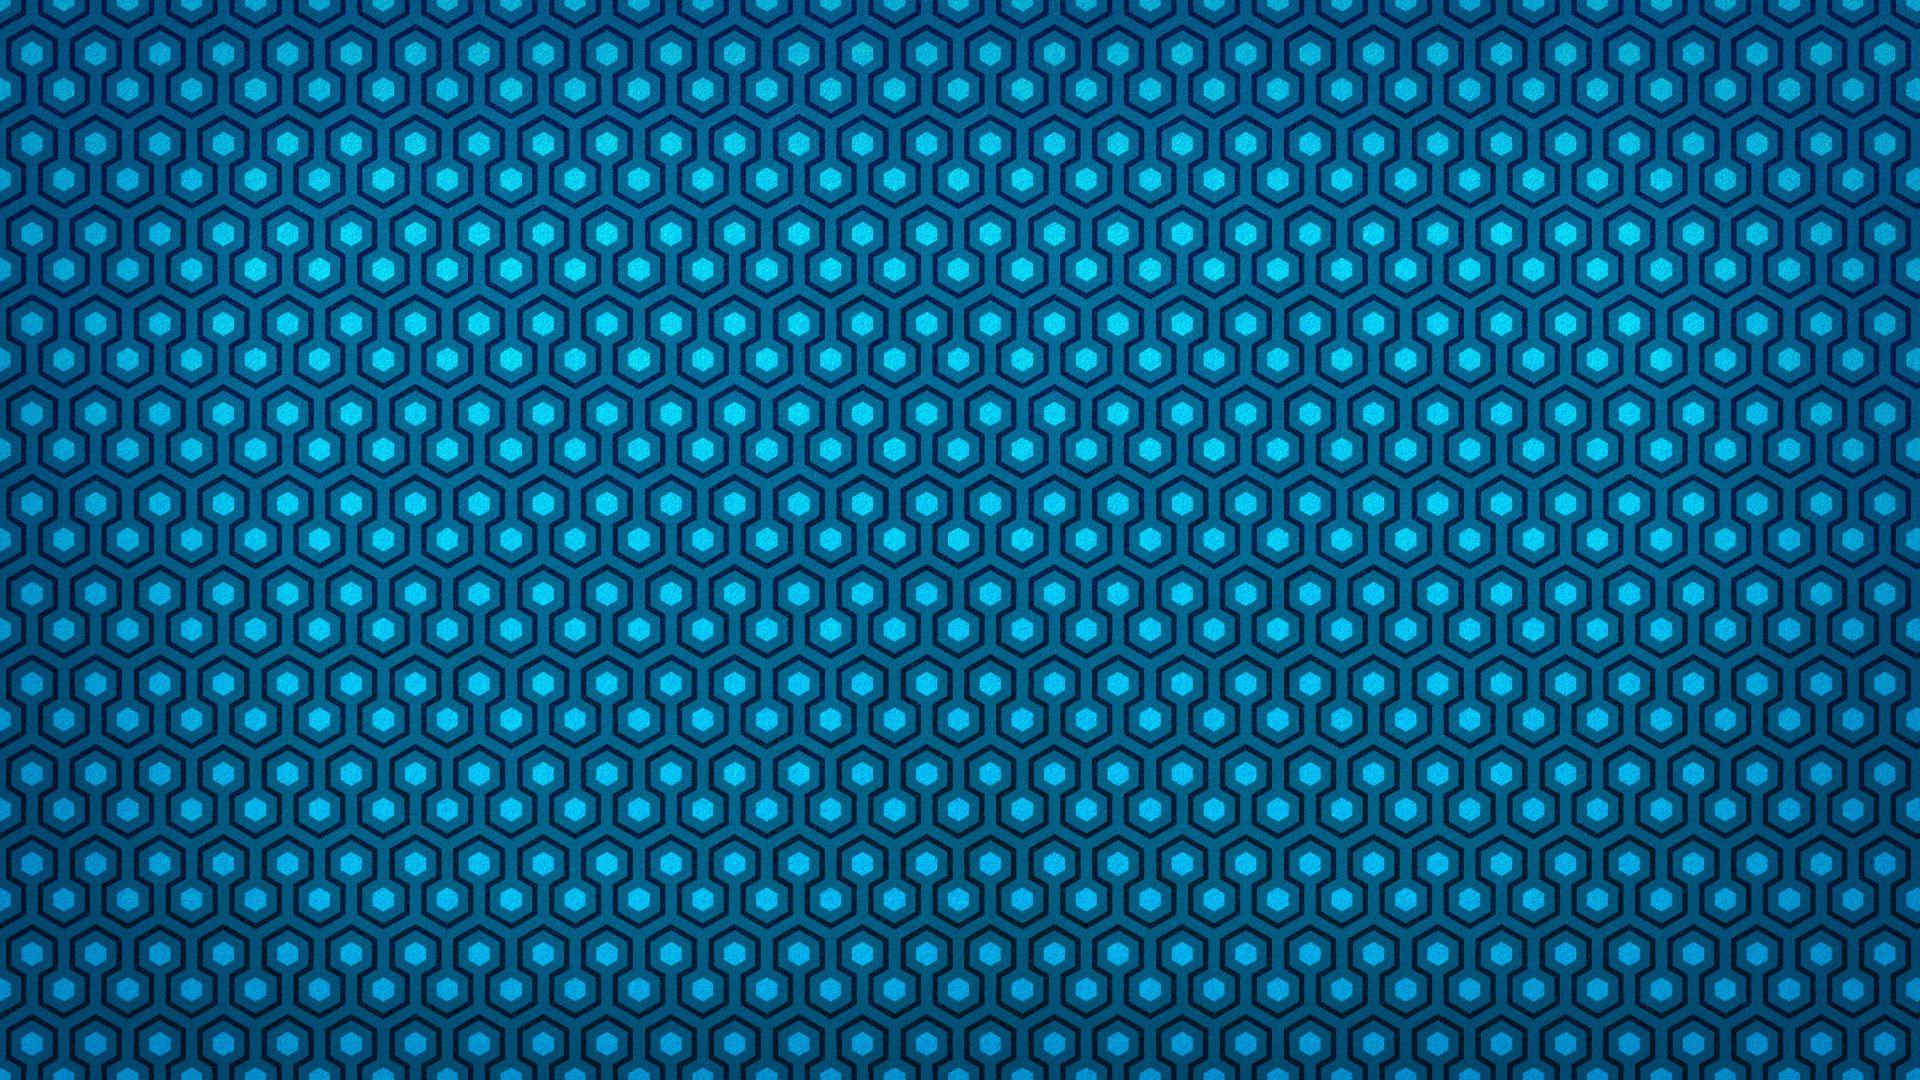 HD wallpaper blue and yellow honeycomb pattern vector abstract design  background  Wallpaper Flare